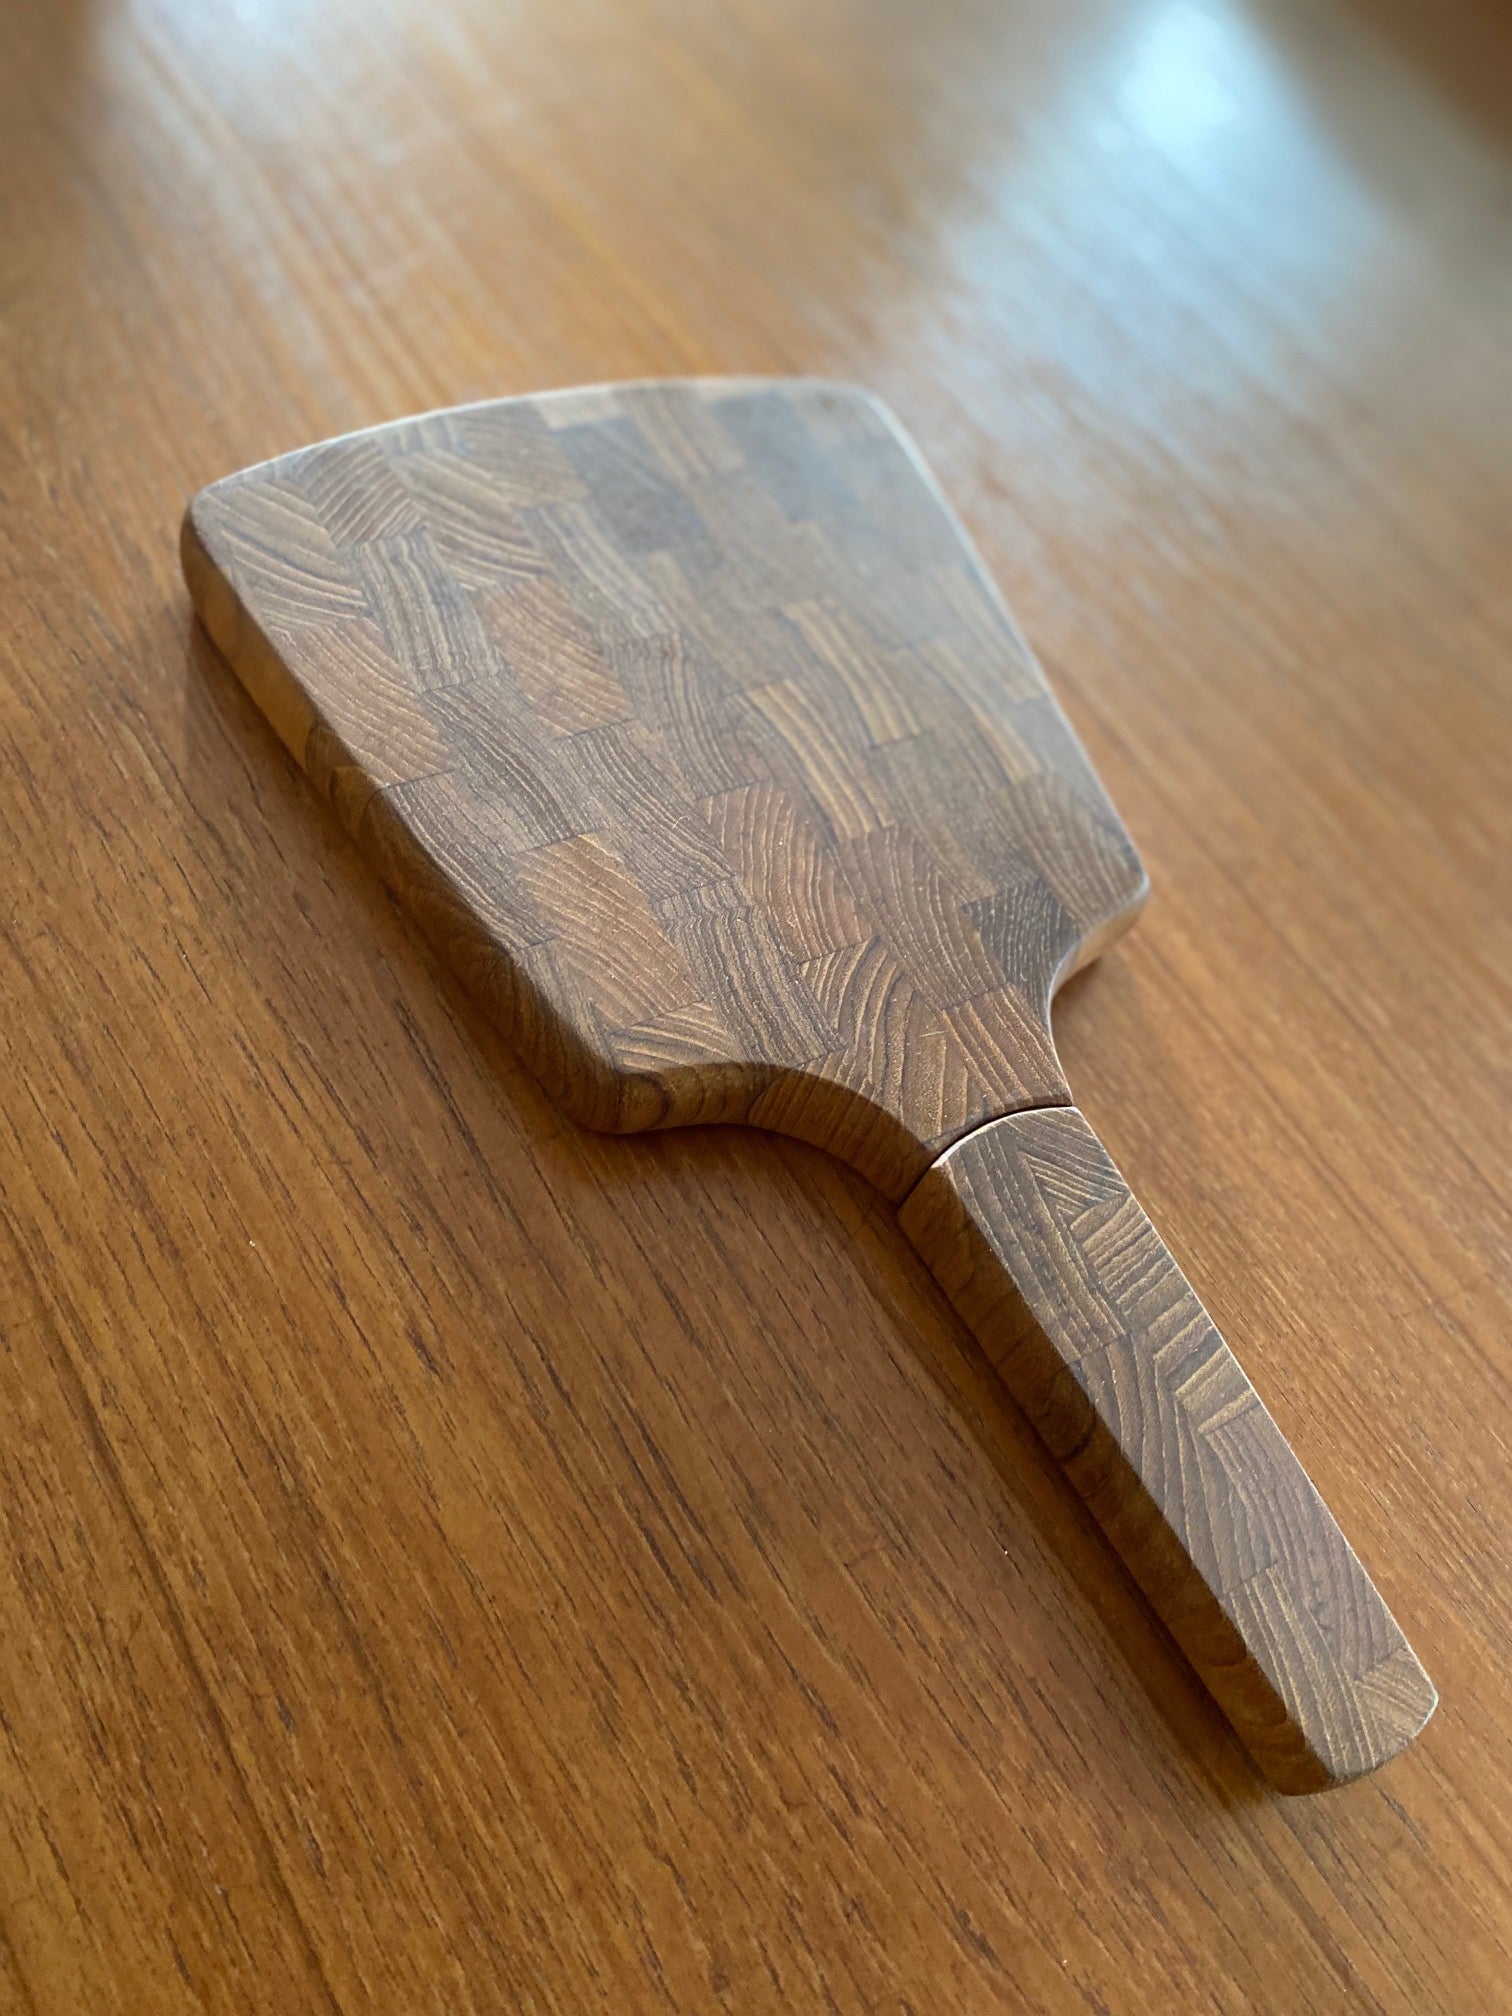  fabulous Jens Harald Quistgaard design. This butcher block style cheese board comes with a handy cheese knife/ spreader- Cook Street Vintage